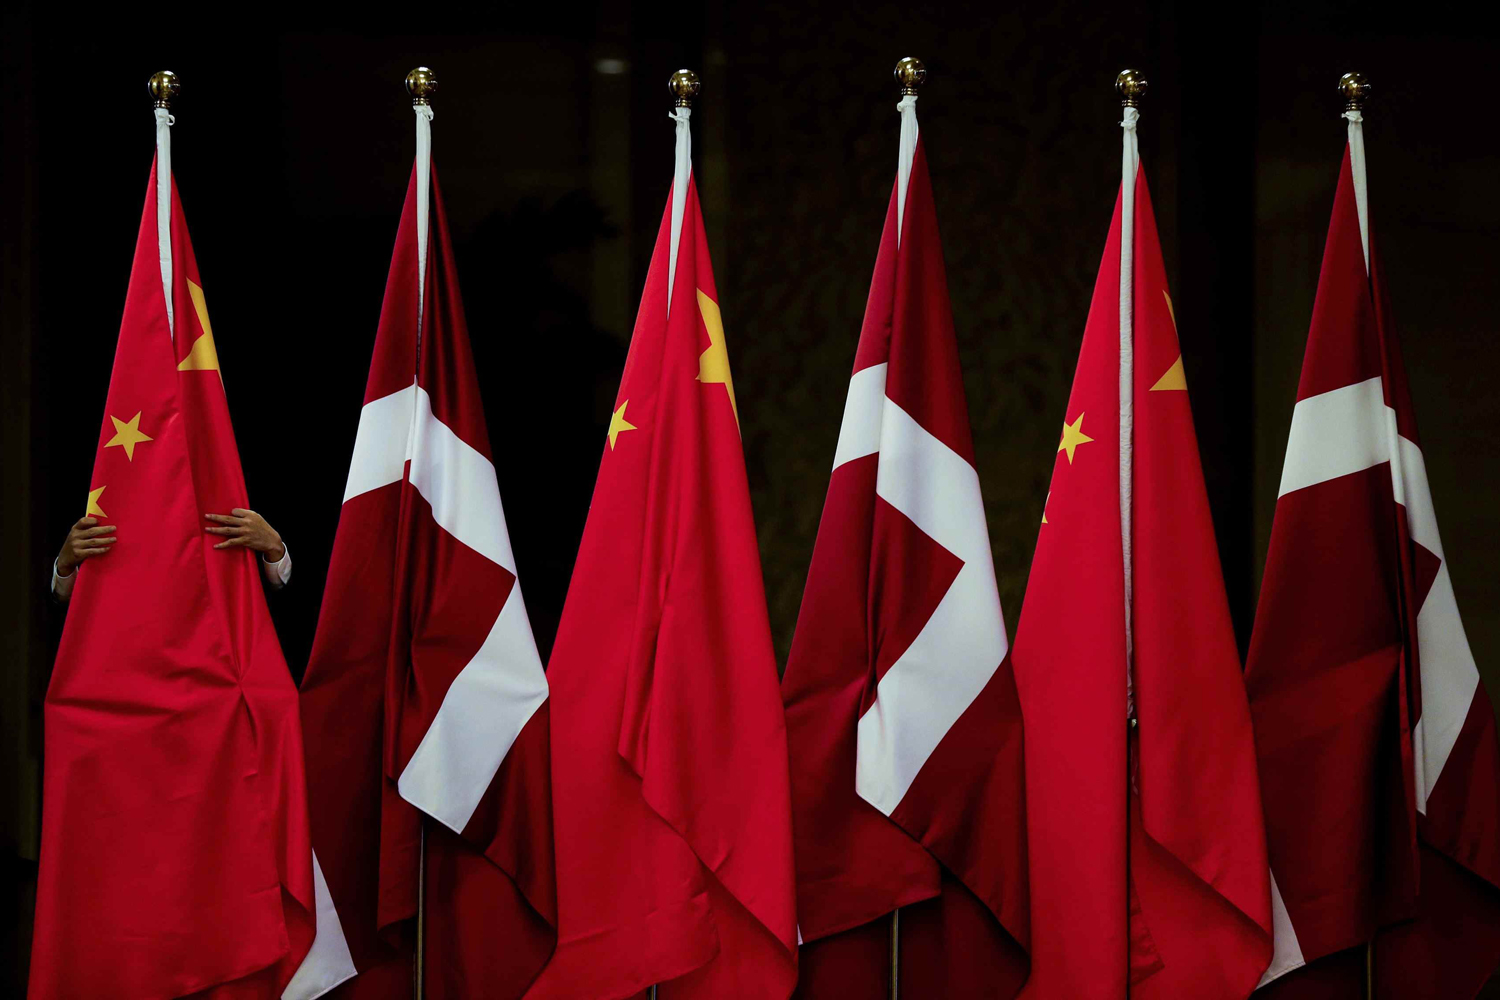 A worker arranges China's and Denmark's national flags displayed outside a room as he prepares for a meeting between the visiting Danish Prime Minister Thorning-Schmidt and Chinese President Xi (both not pictured) at the Great Hall of the People in Beijin